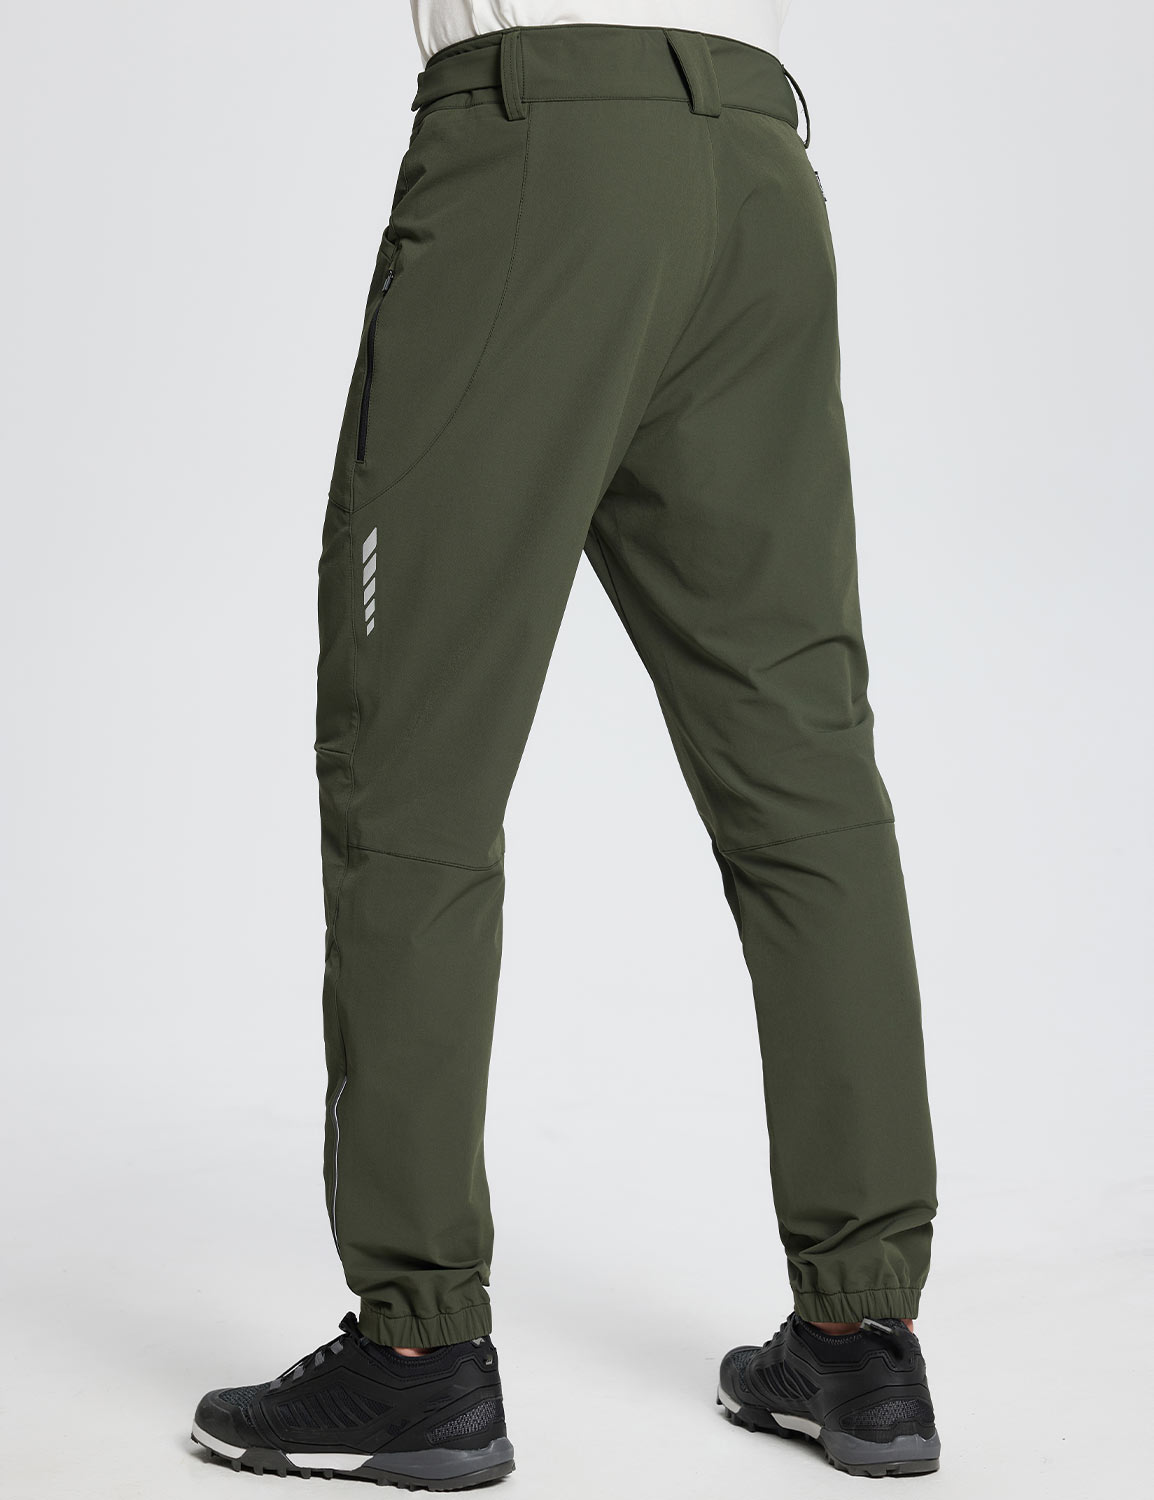 Flyleaf Water-Resistant Pocketed Cycling Pants